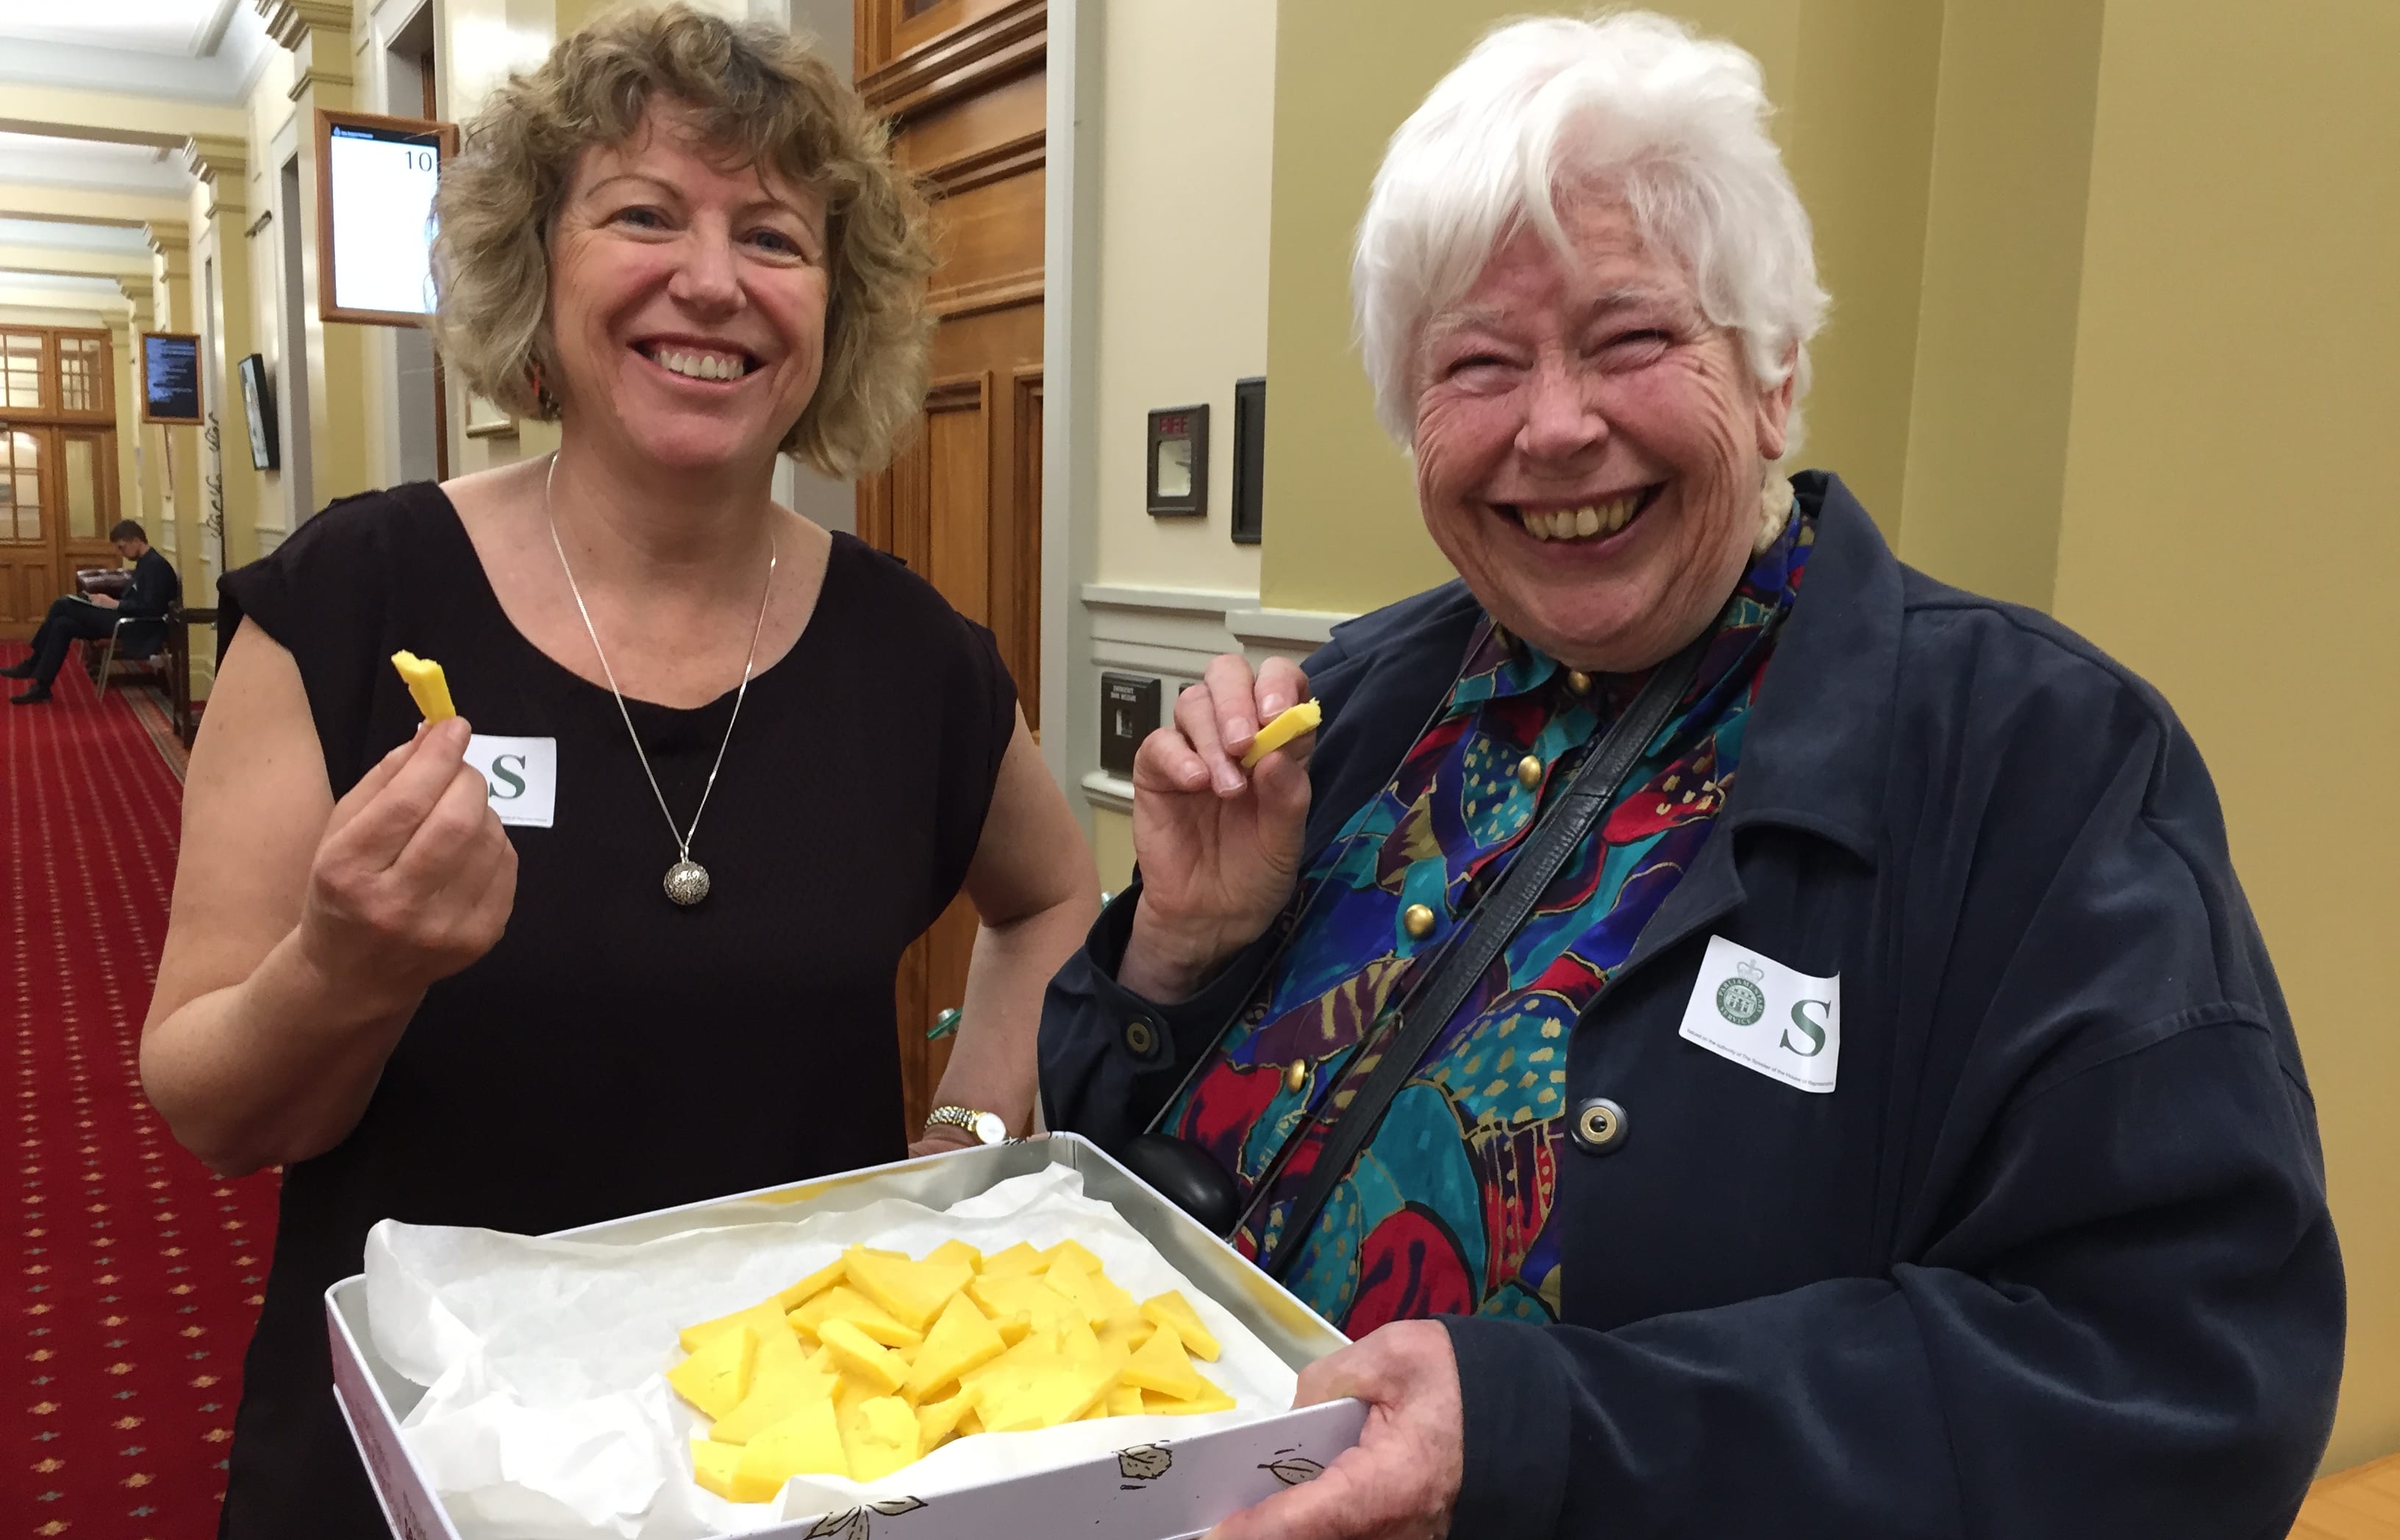 Biddy Fraser Davies and Jill Whalley offered raw milk cheese to a select committee to taste.